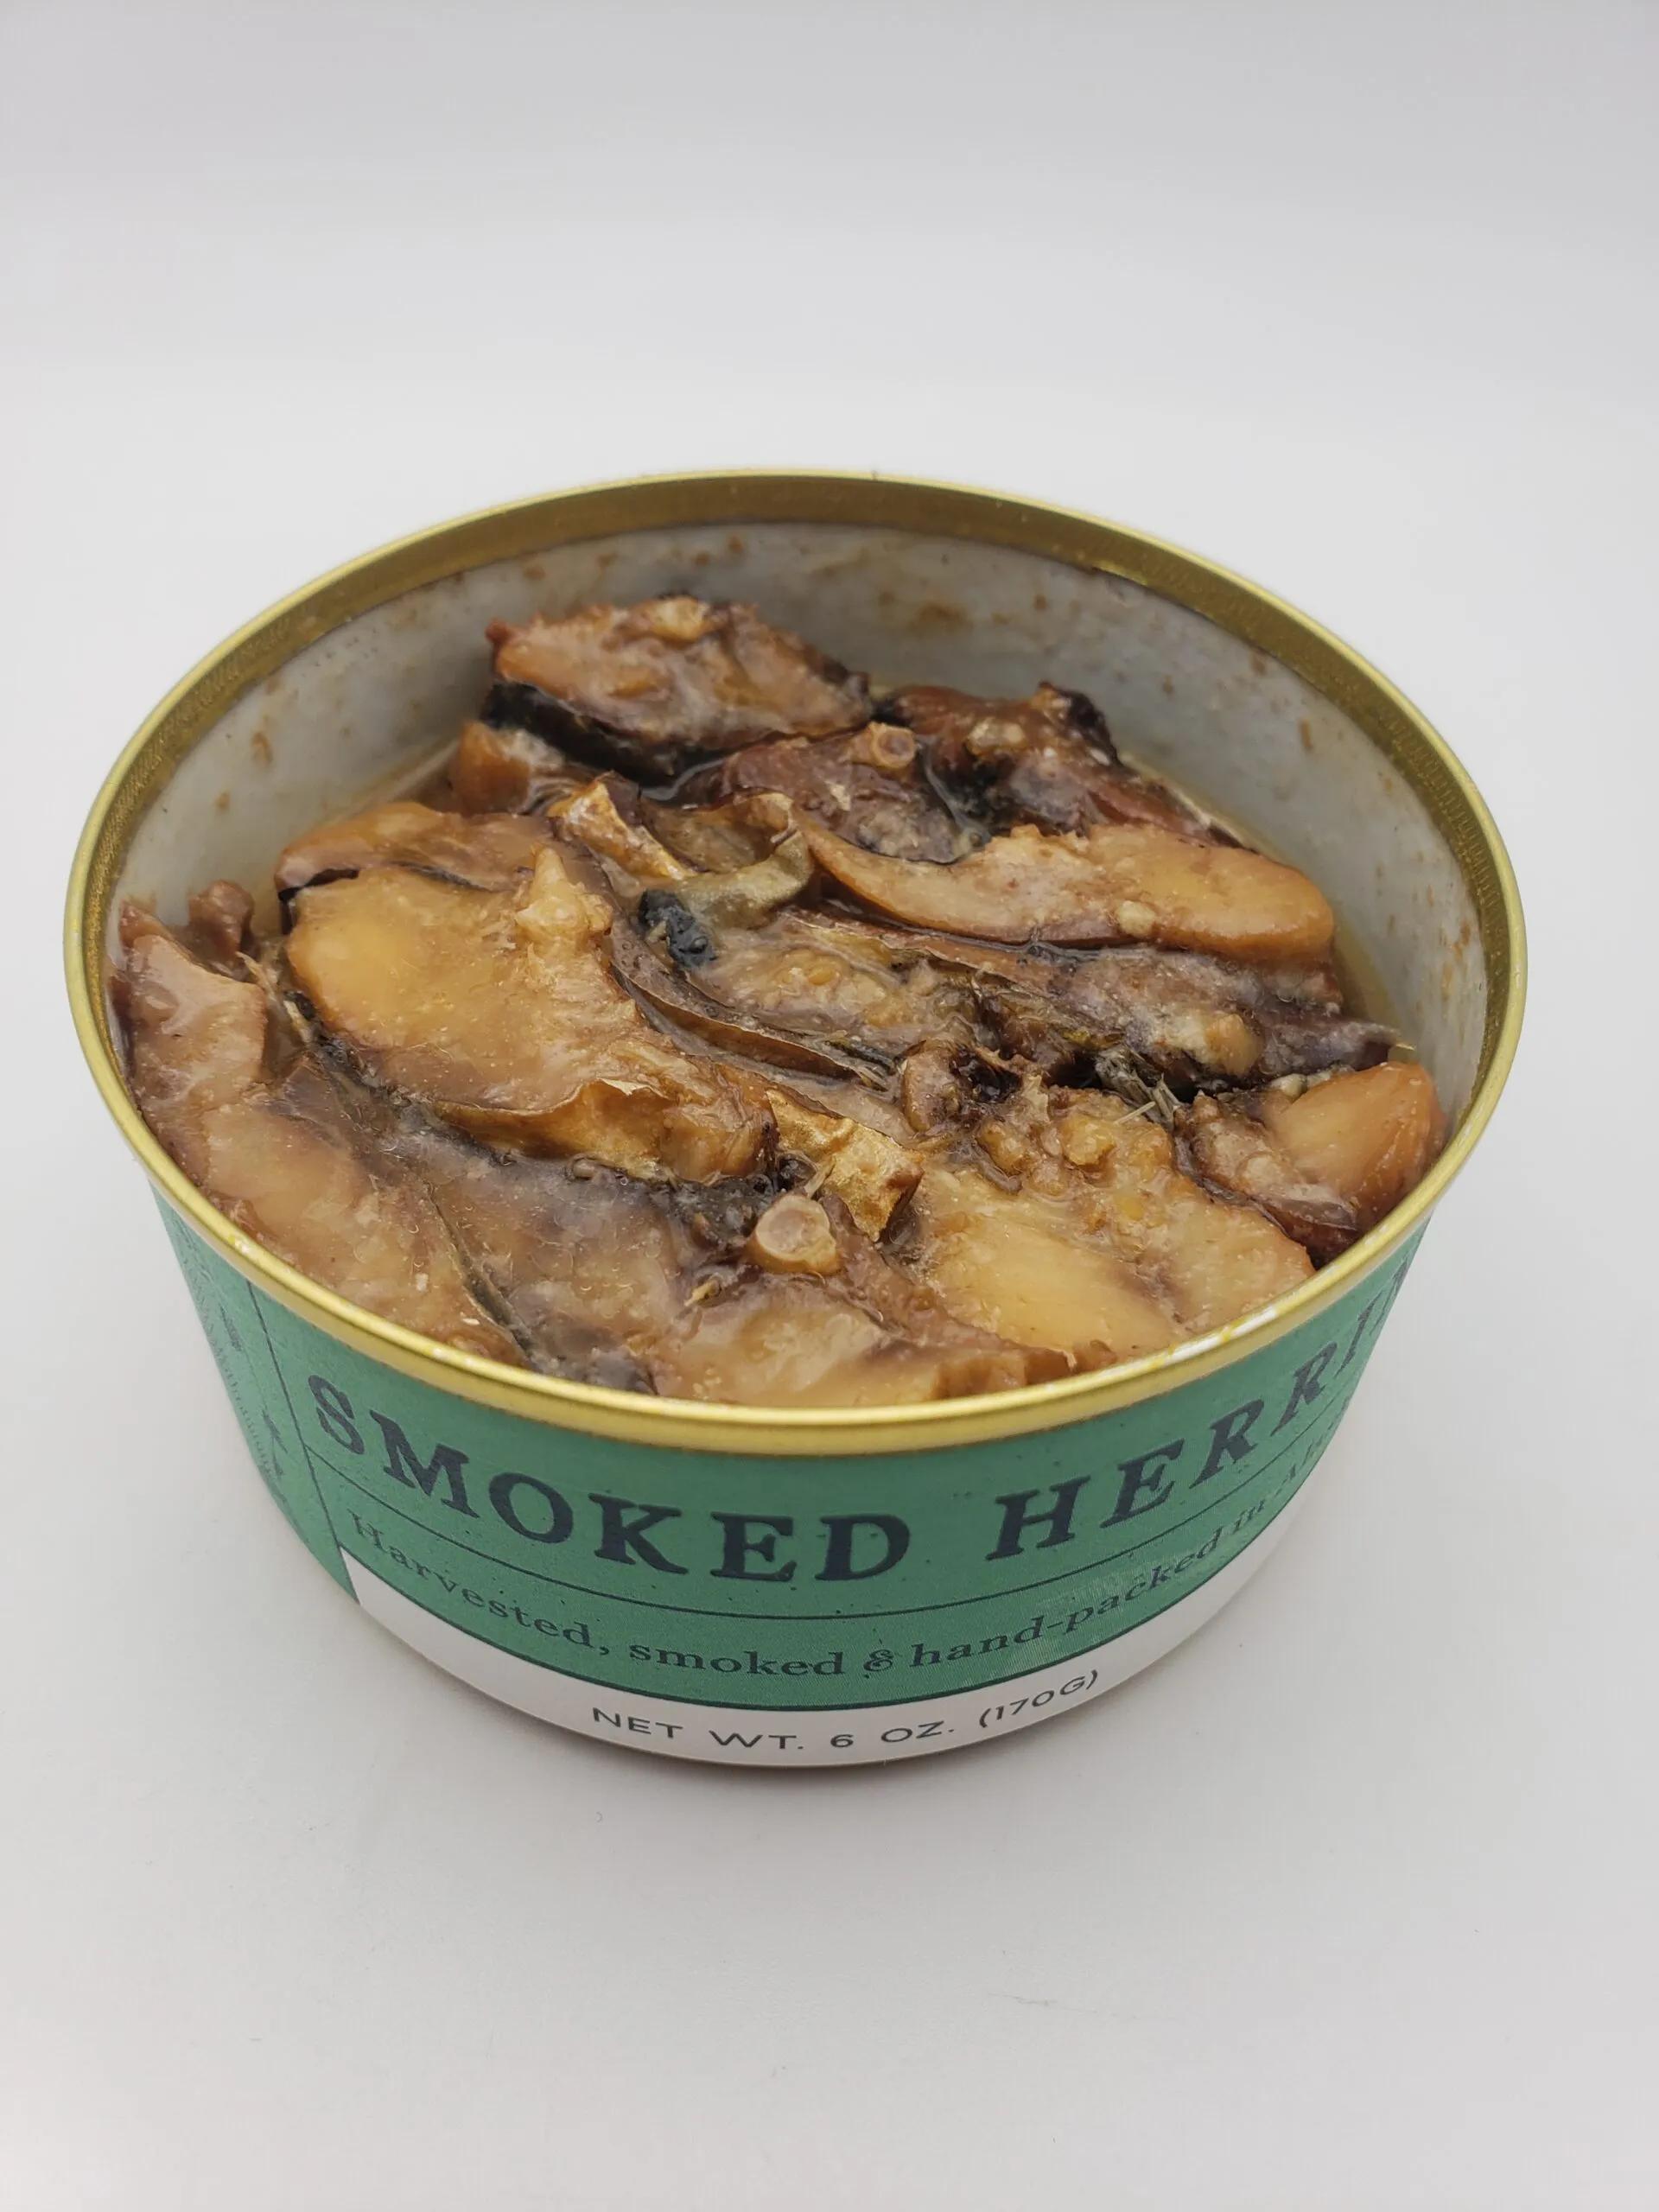 smoked herring in a can - How do you eat canned herring